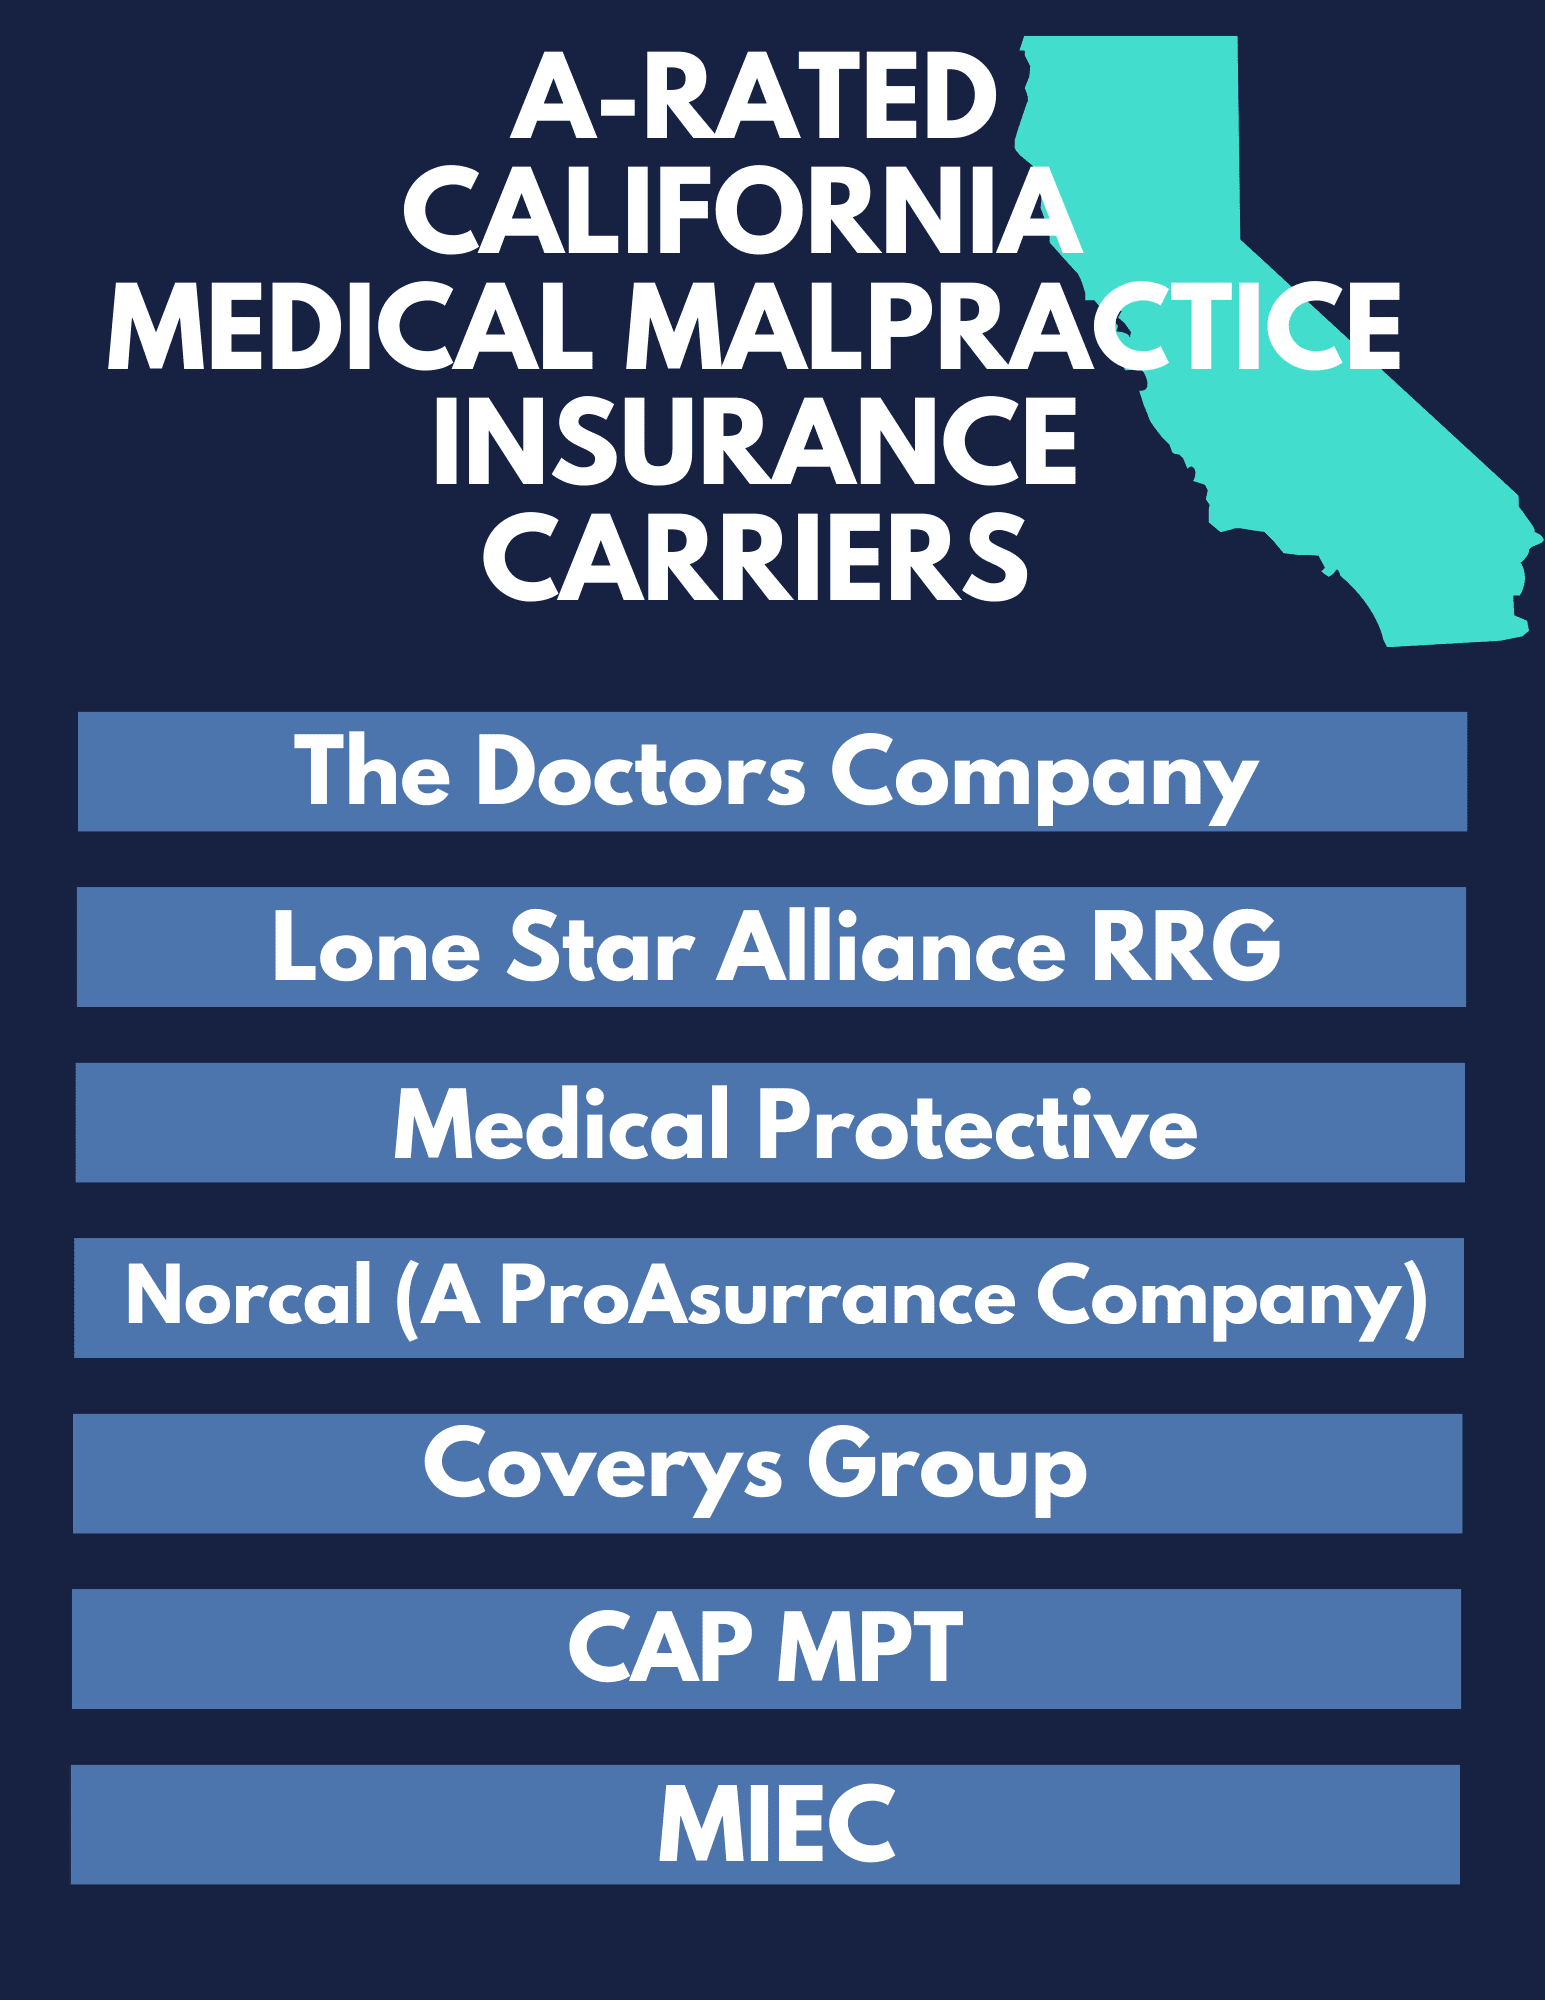 A-Rated California Medical Malpractice Insurance Carriers